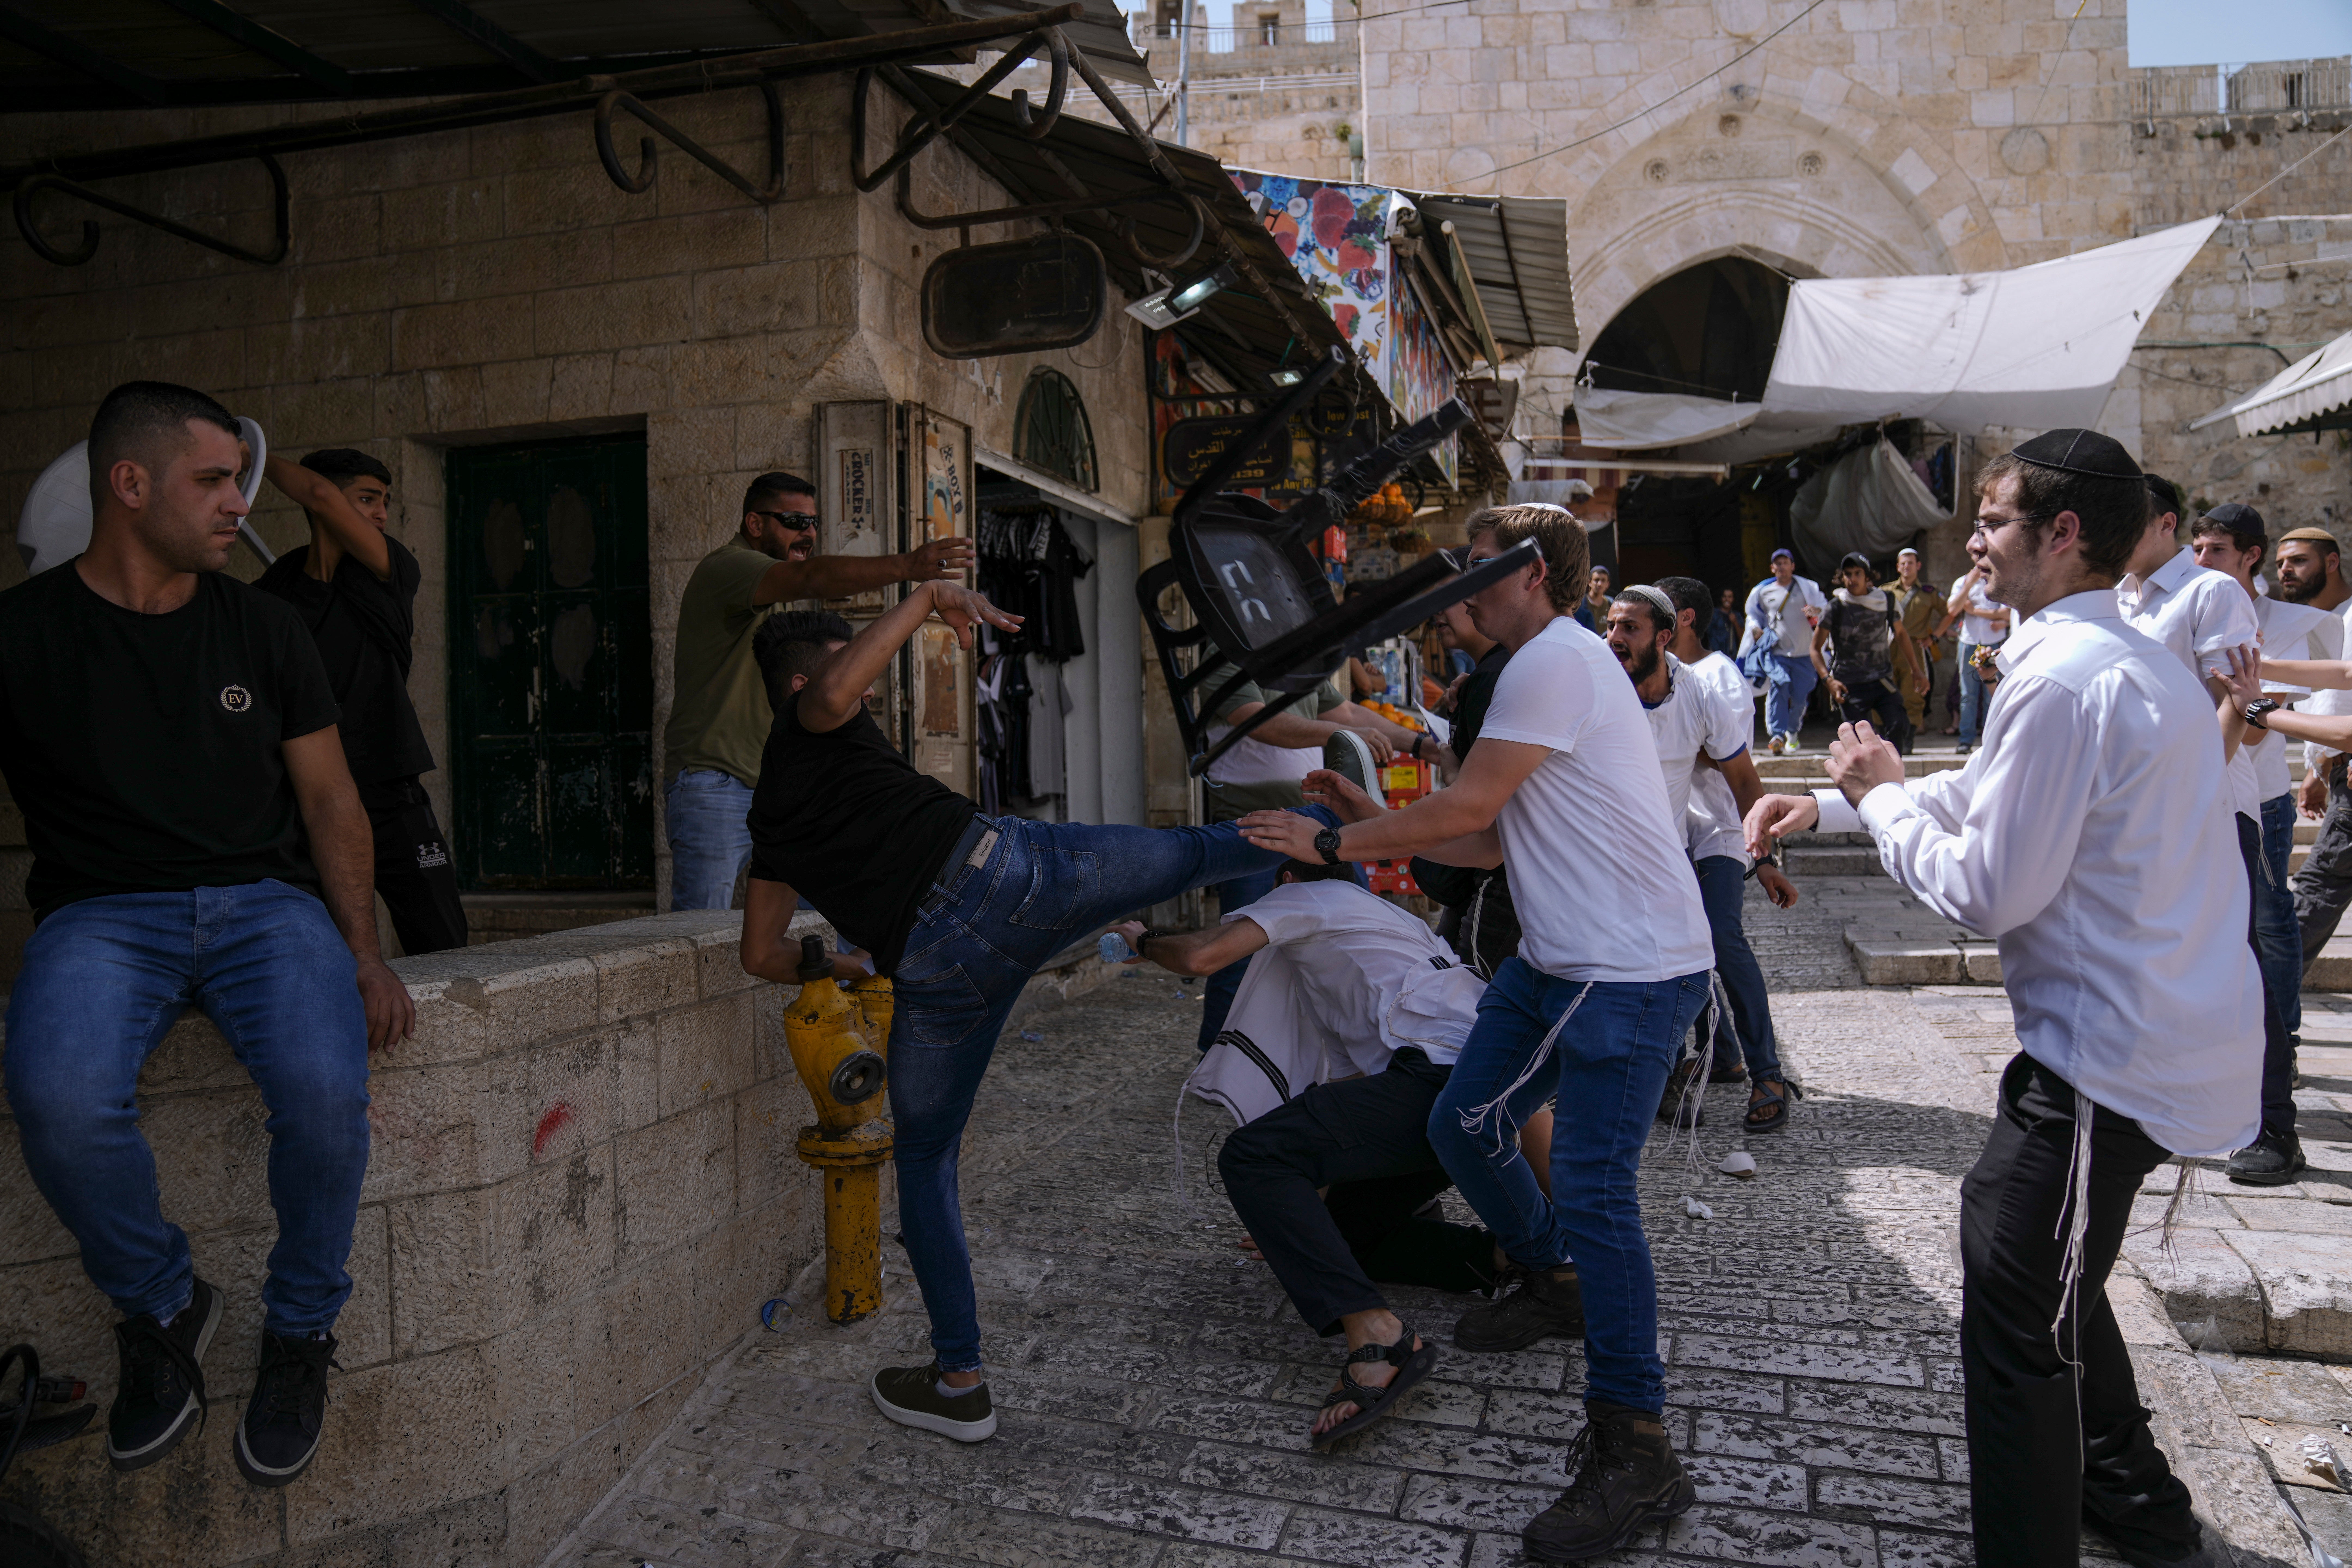 Palestinians and Jewish youths clash in Jerusalem’s Old City as Israelis mark Jerusalem Day on 29 May